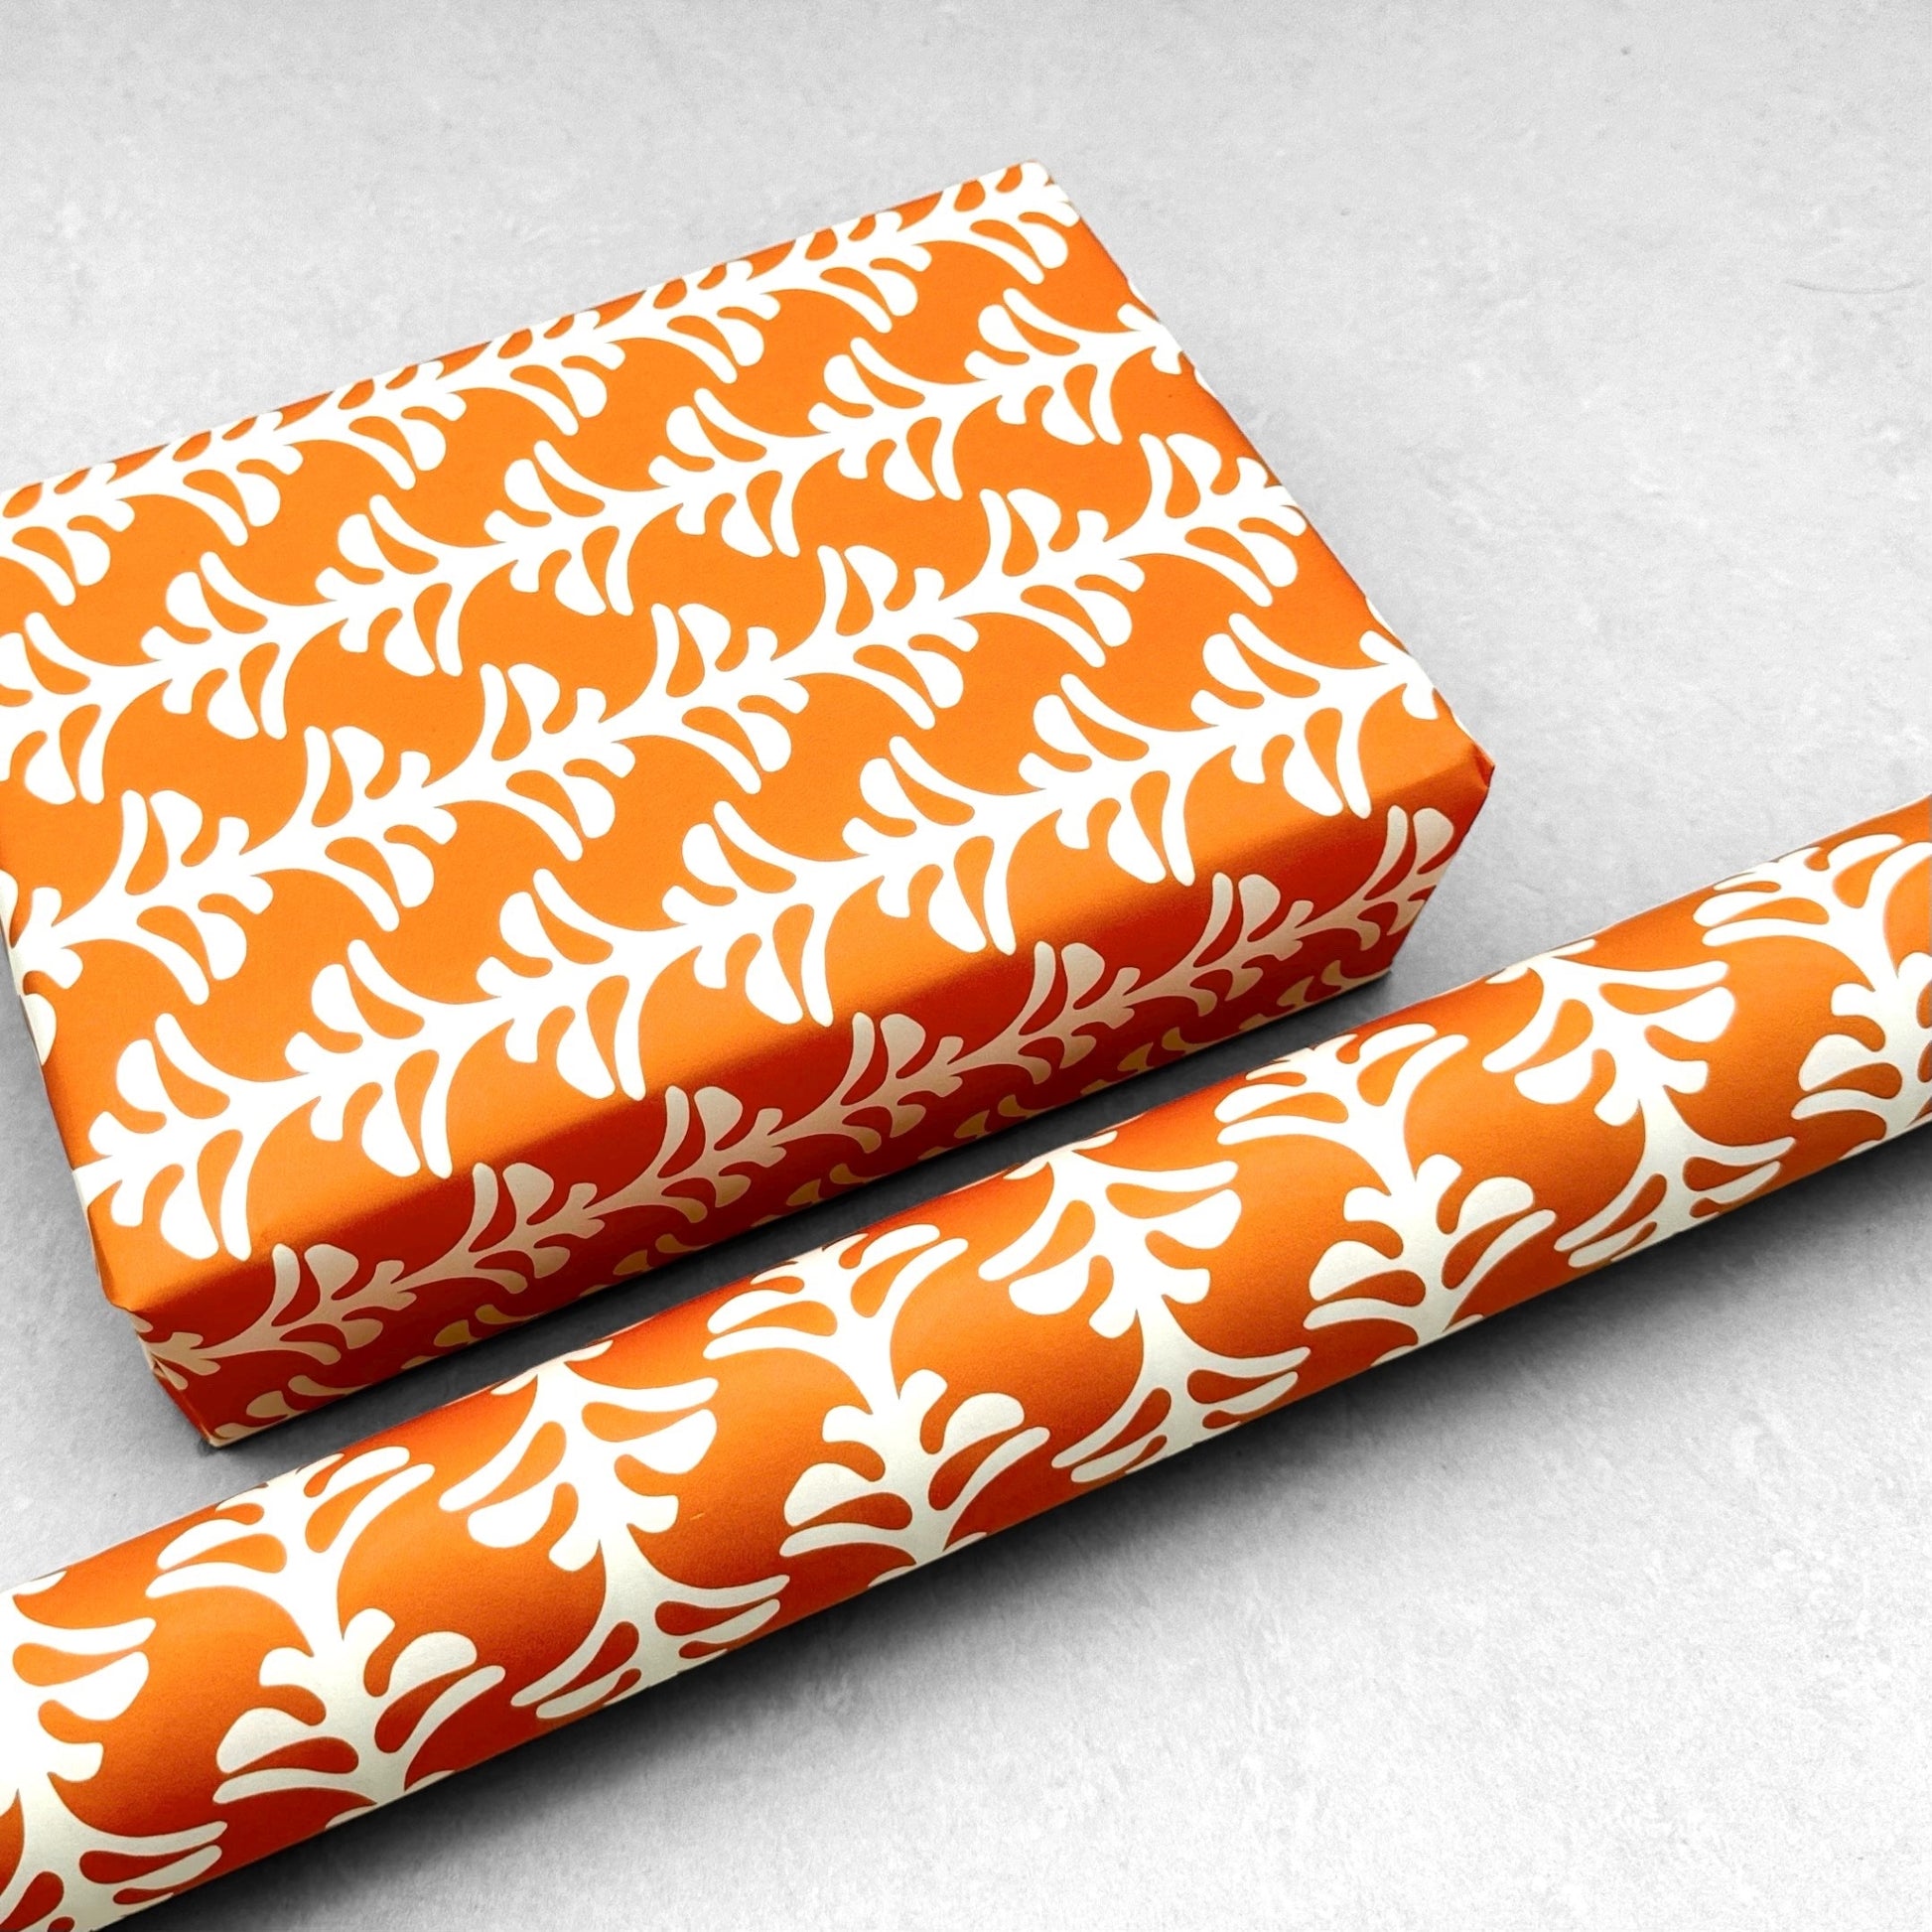 wrapping paper by Otto Editions with a cut-out palm design in white on a spice orange background. Pictured wrapped as a present with a roll of the paper